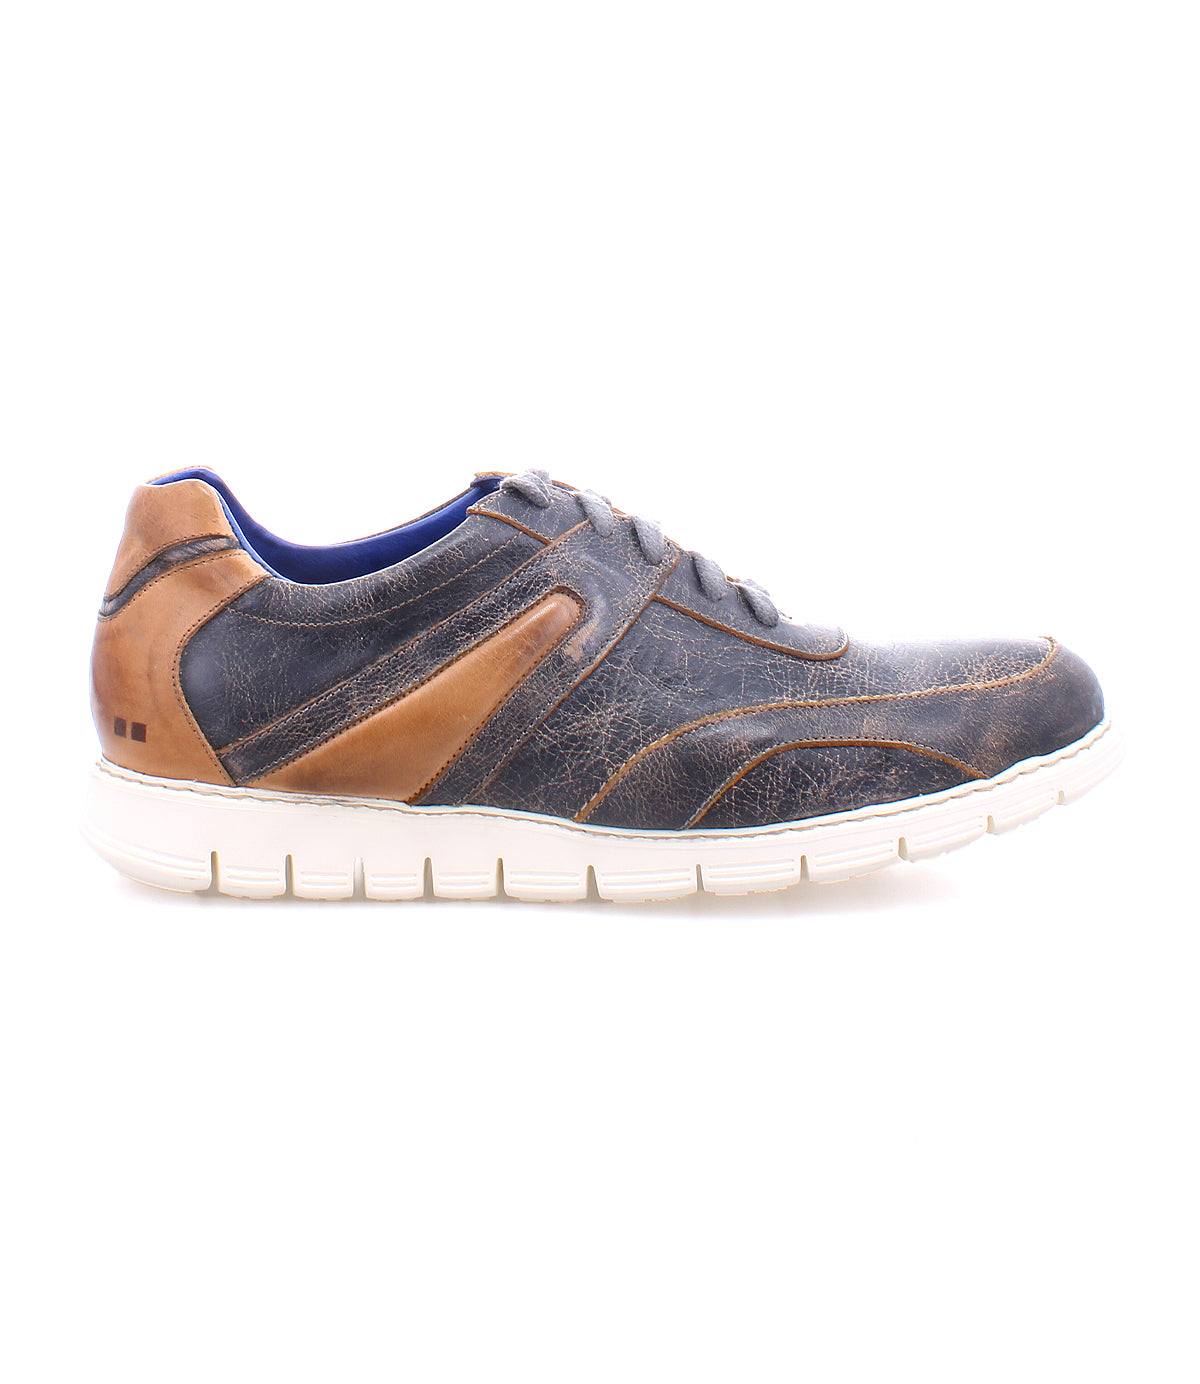 A men's Wardell blue lace-up sneaker made of tan leather by Bed Stu for comfort.